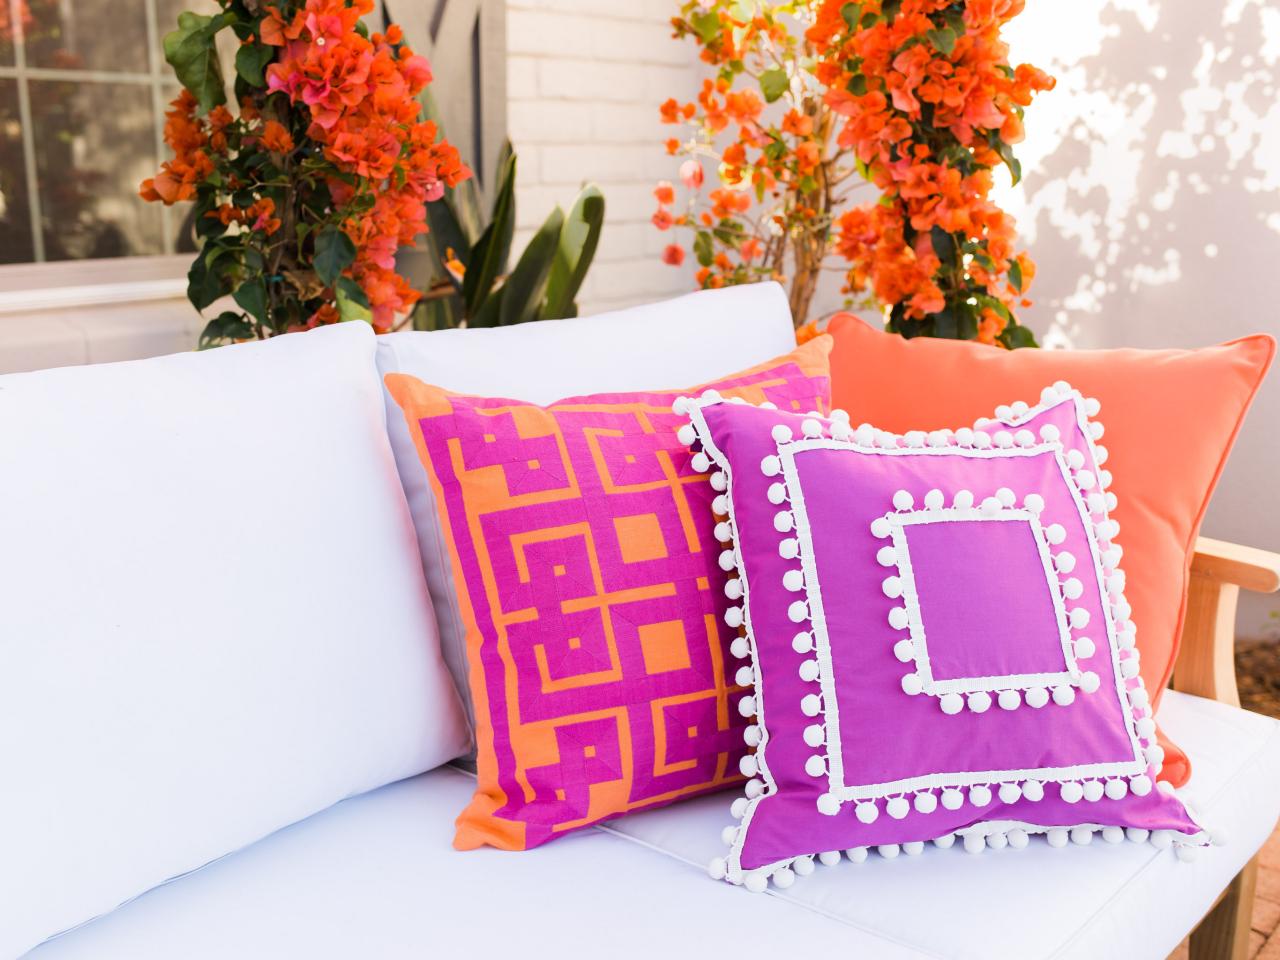 Redecorate With What You Have - pillows